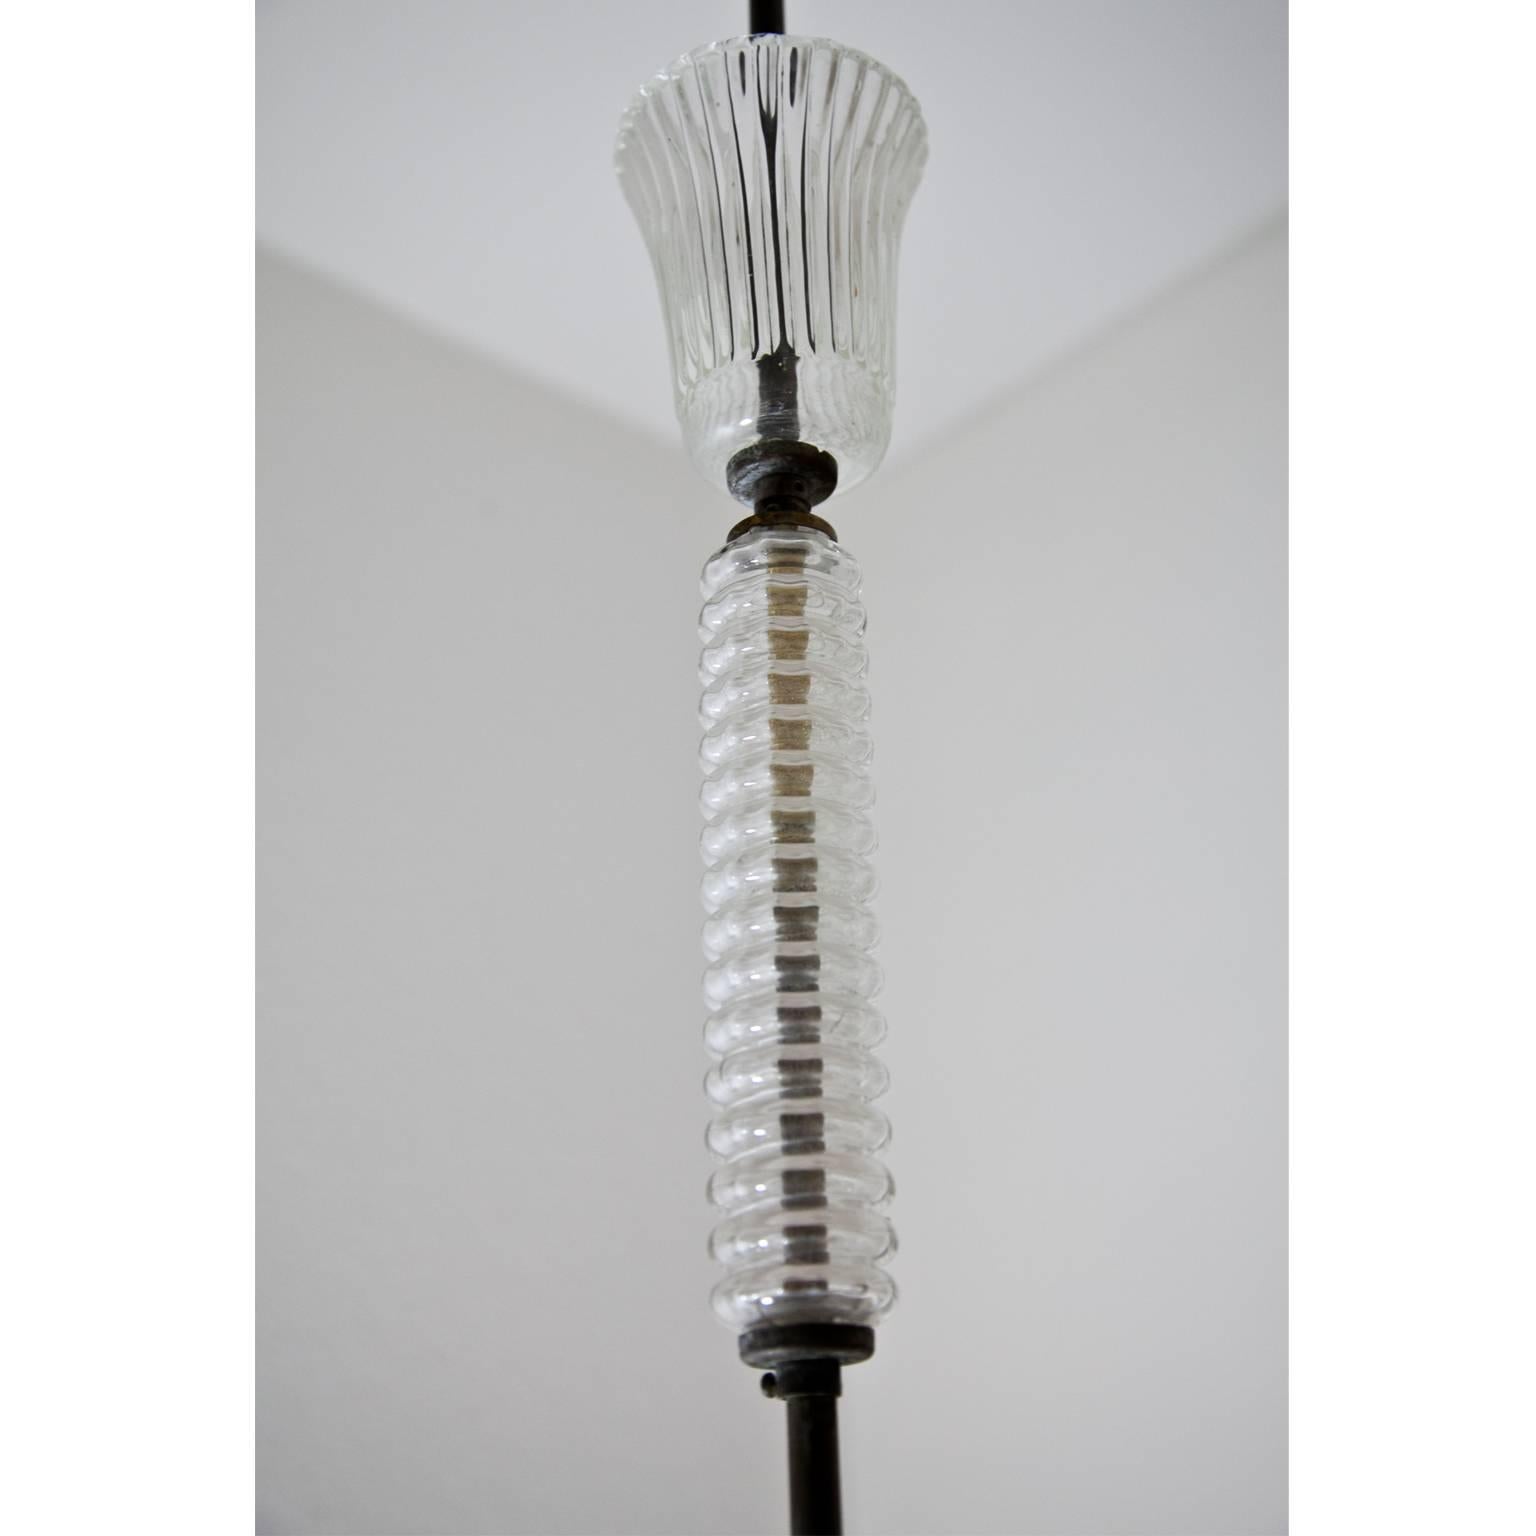 Low pendant light, attributed to Barovier e Toso, from the 1940s. The glass elements are all clear glass and show the typical structured surface.

For the electrification we assume no liability and no warranty.